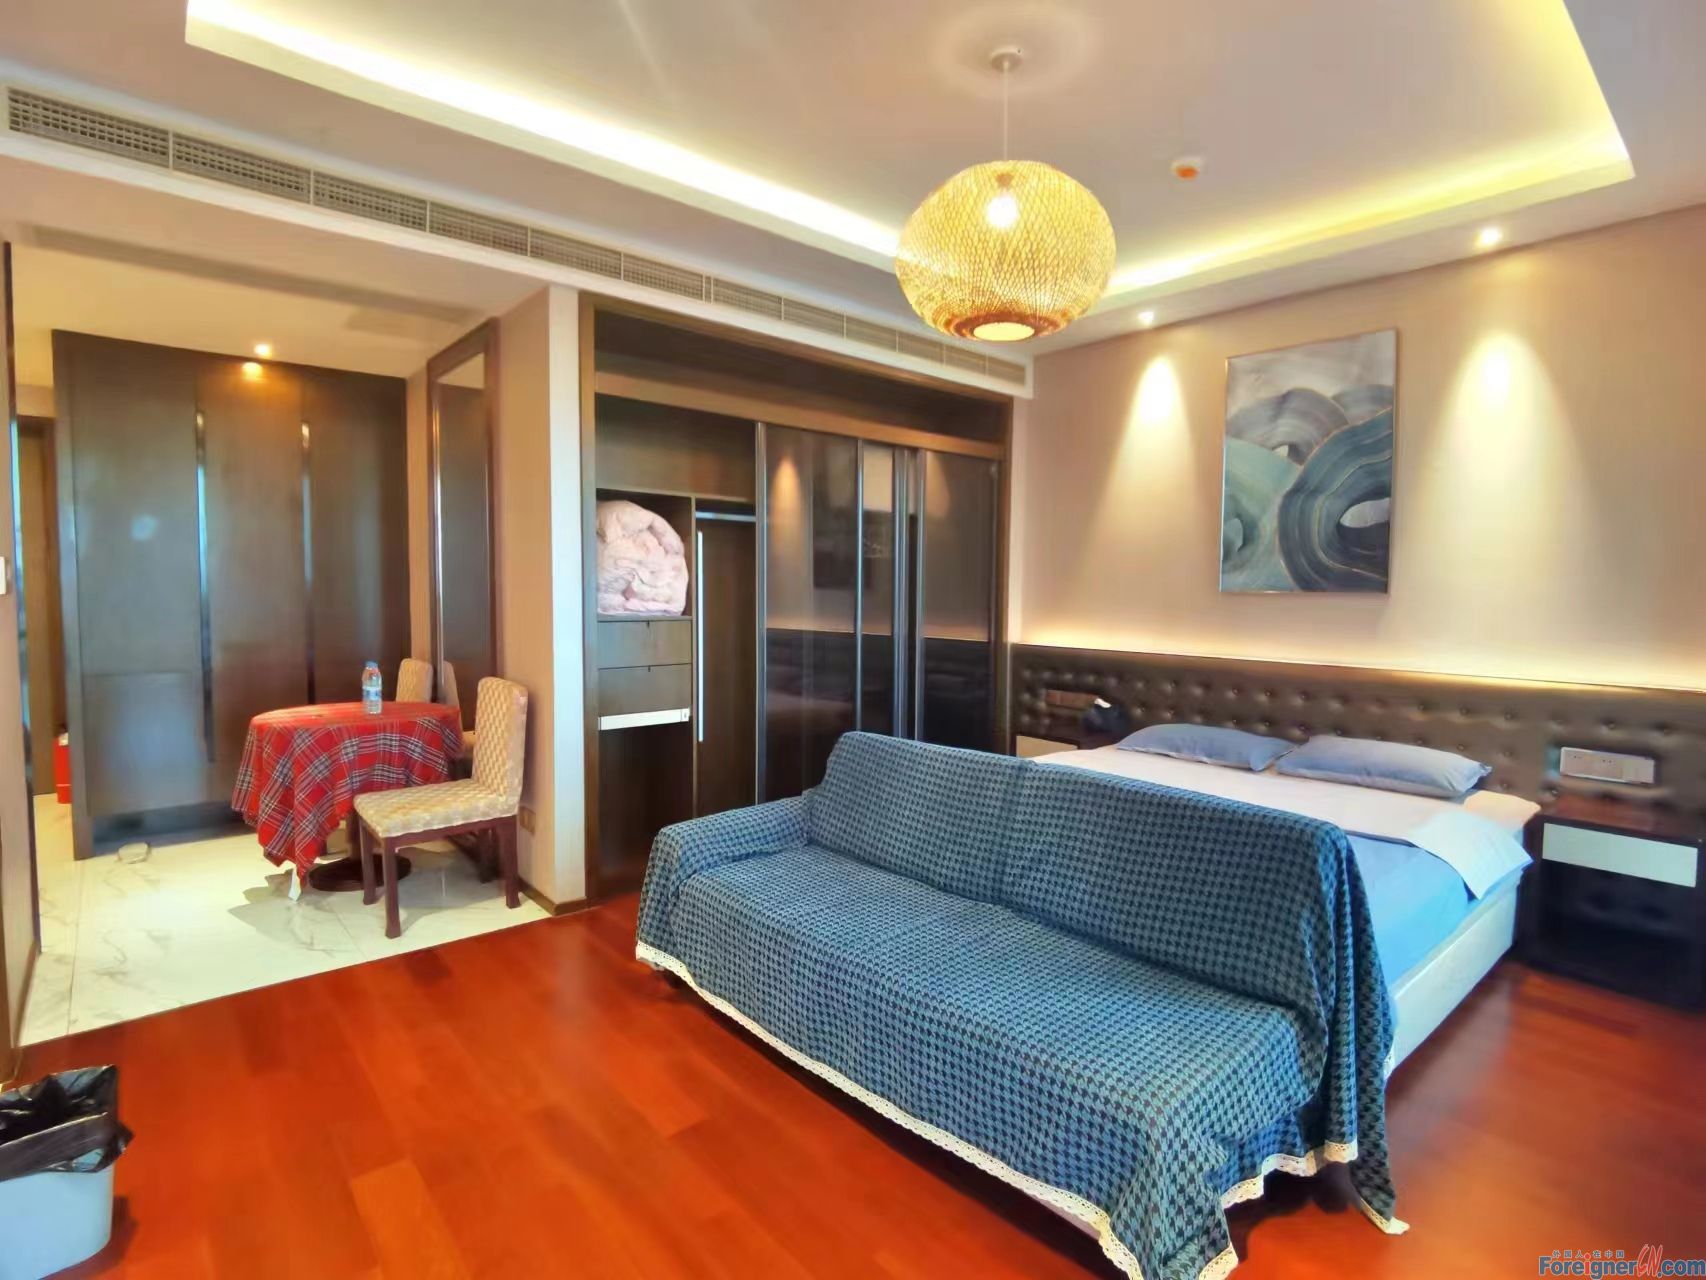 Gorgeous!!！HLCC apartment to rent / 1 bedroom and 1 bathroom/central AC, floor heating/Times Square/CBD of east Jinji lake 